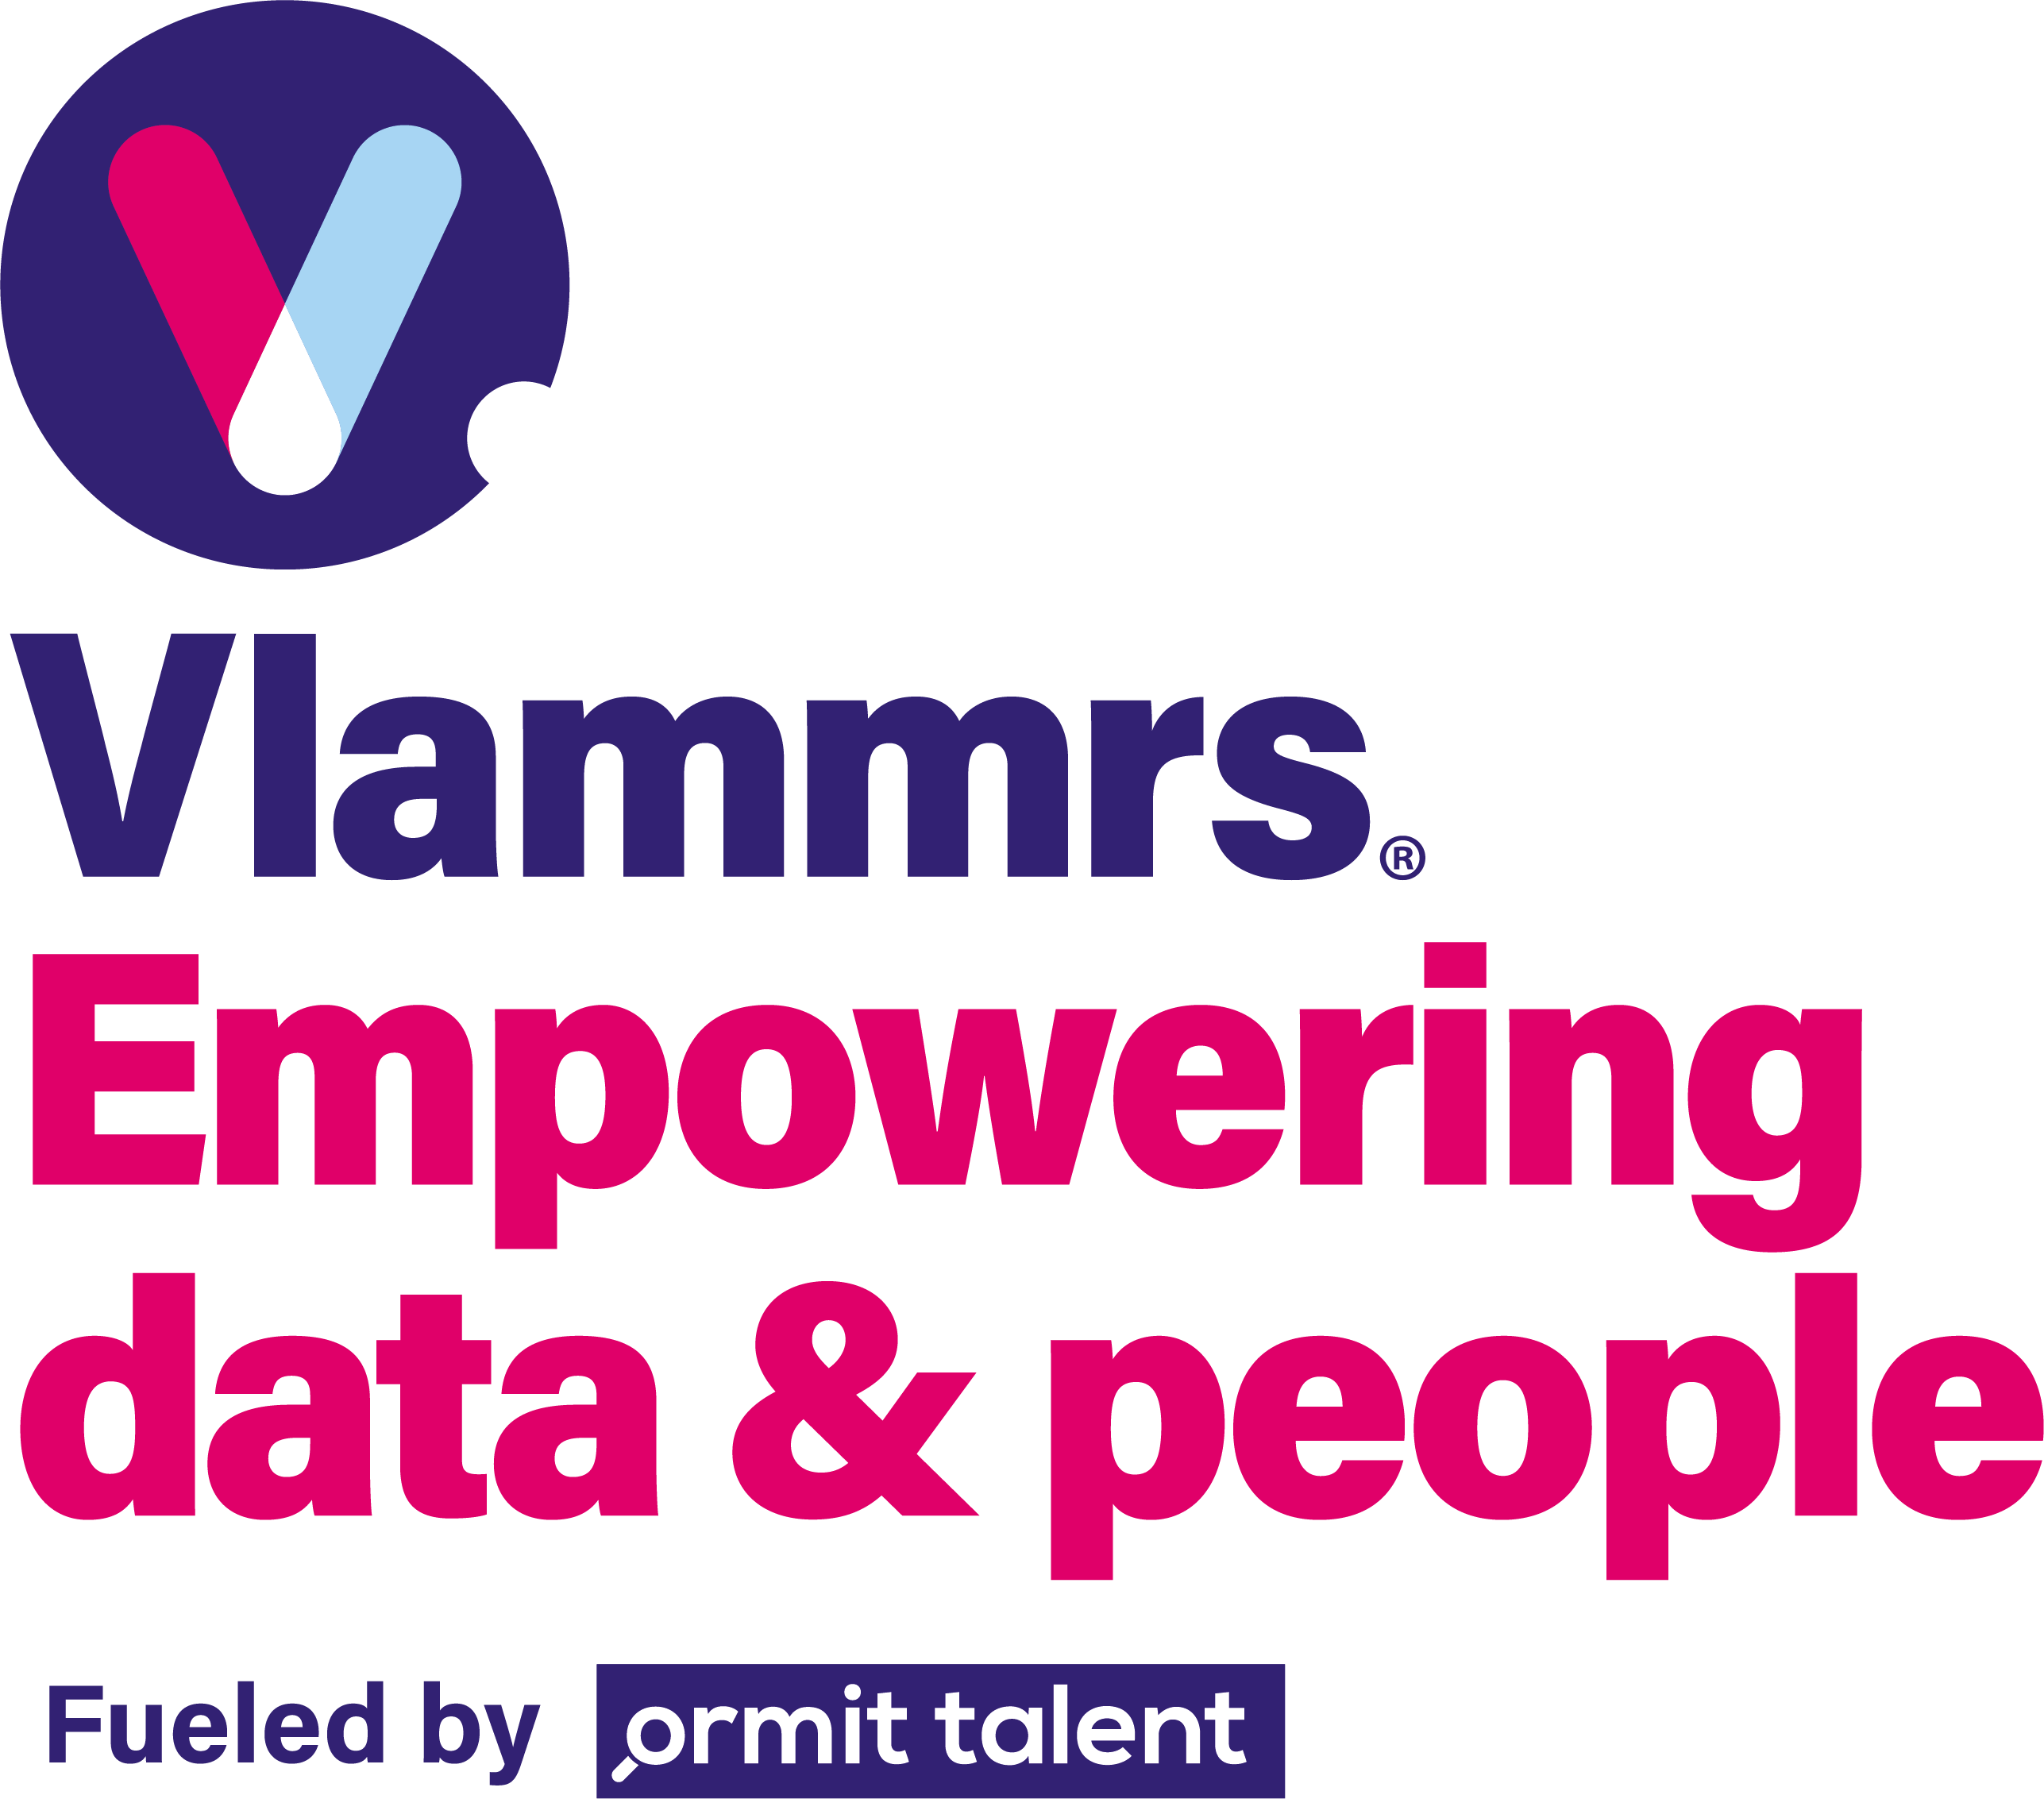 vlammrs logos_fueled by_ormittalent_cmyk_Pay-off